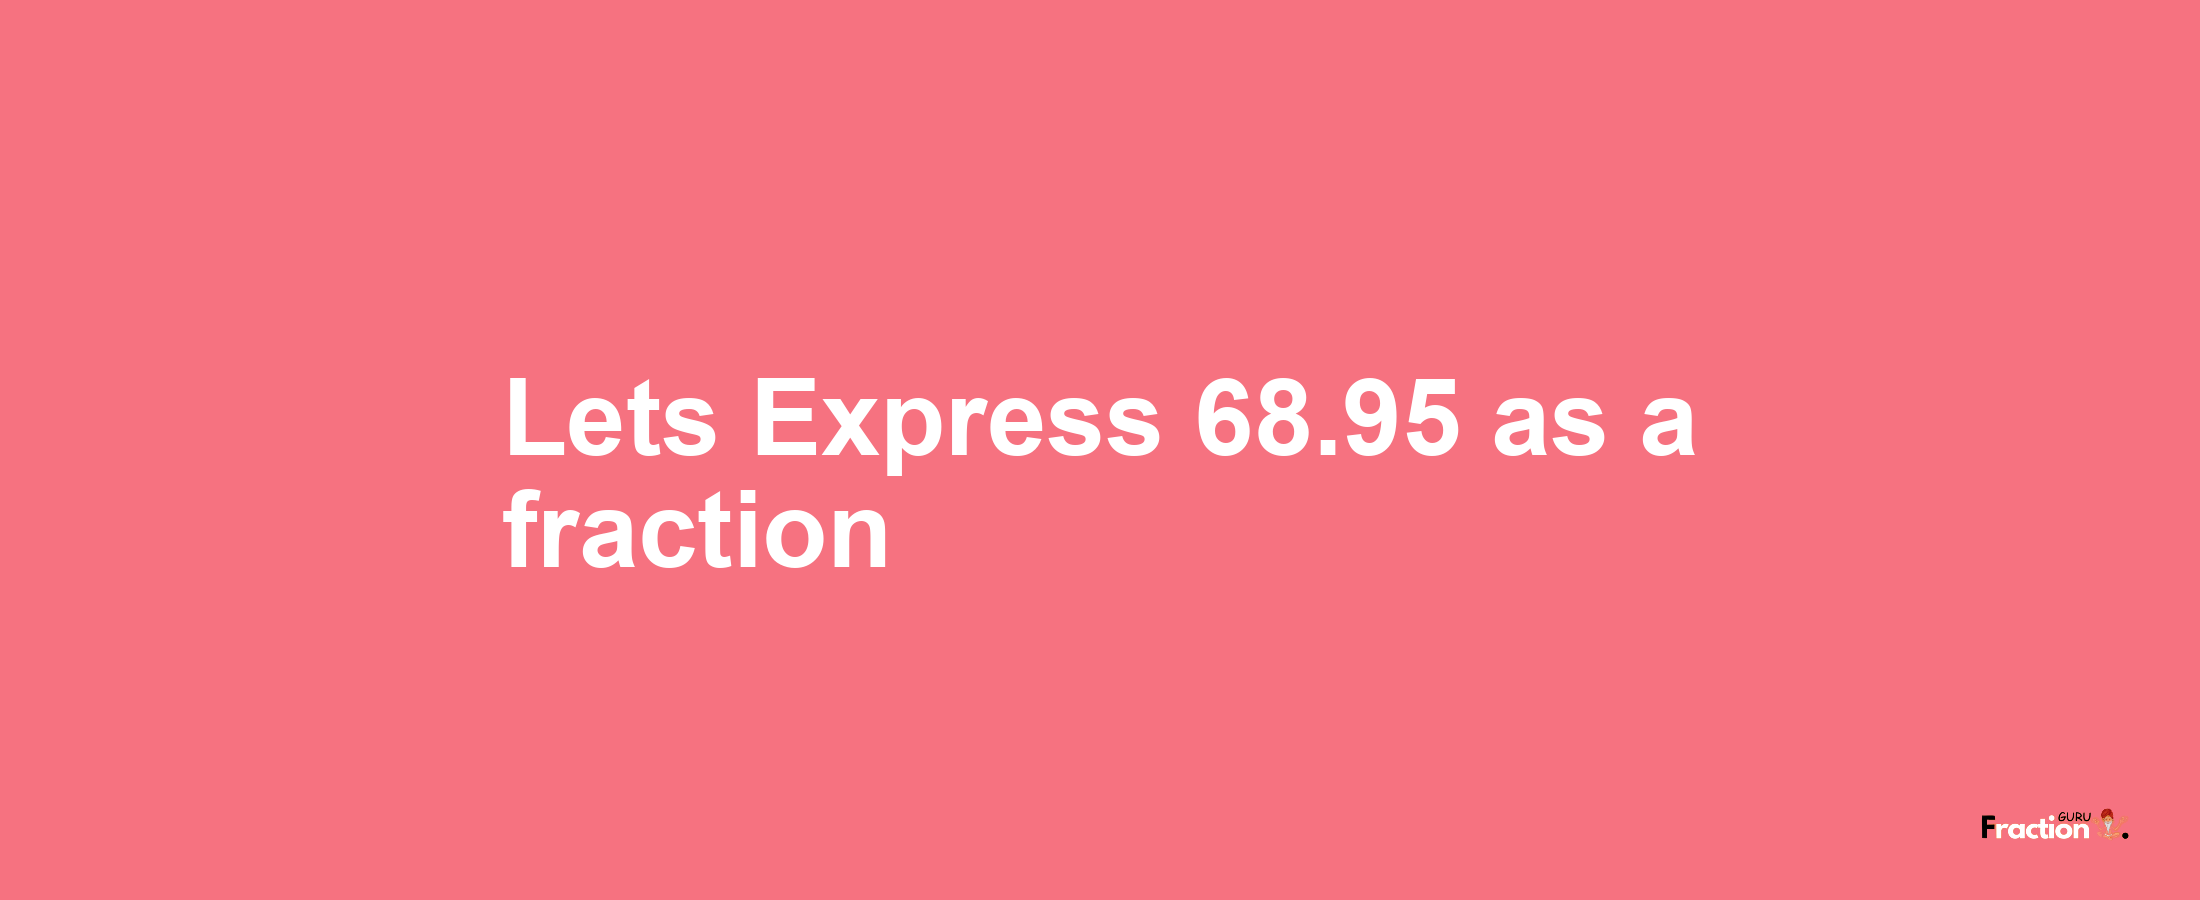 Lets Express 68.95 as afraction